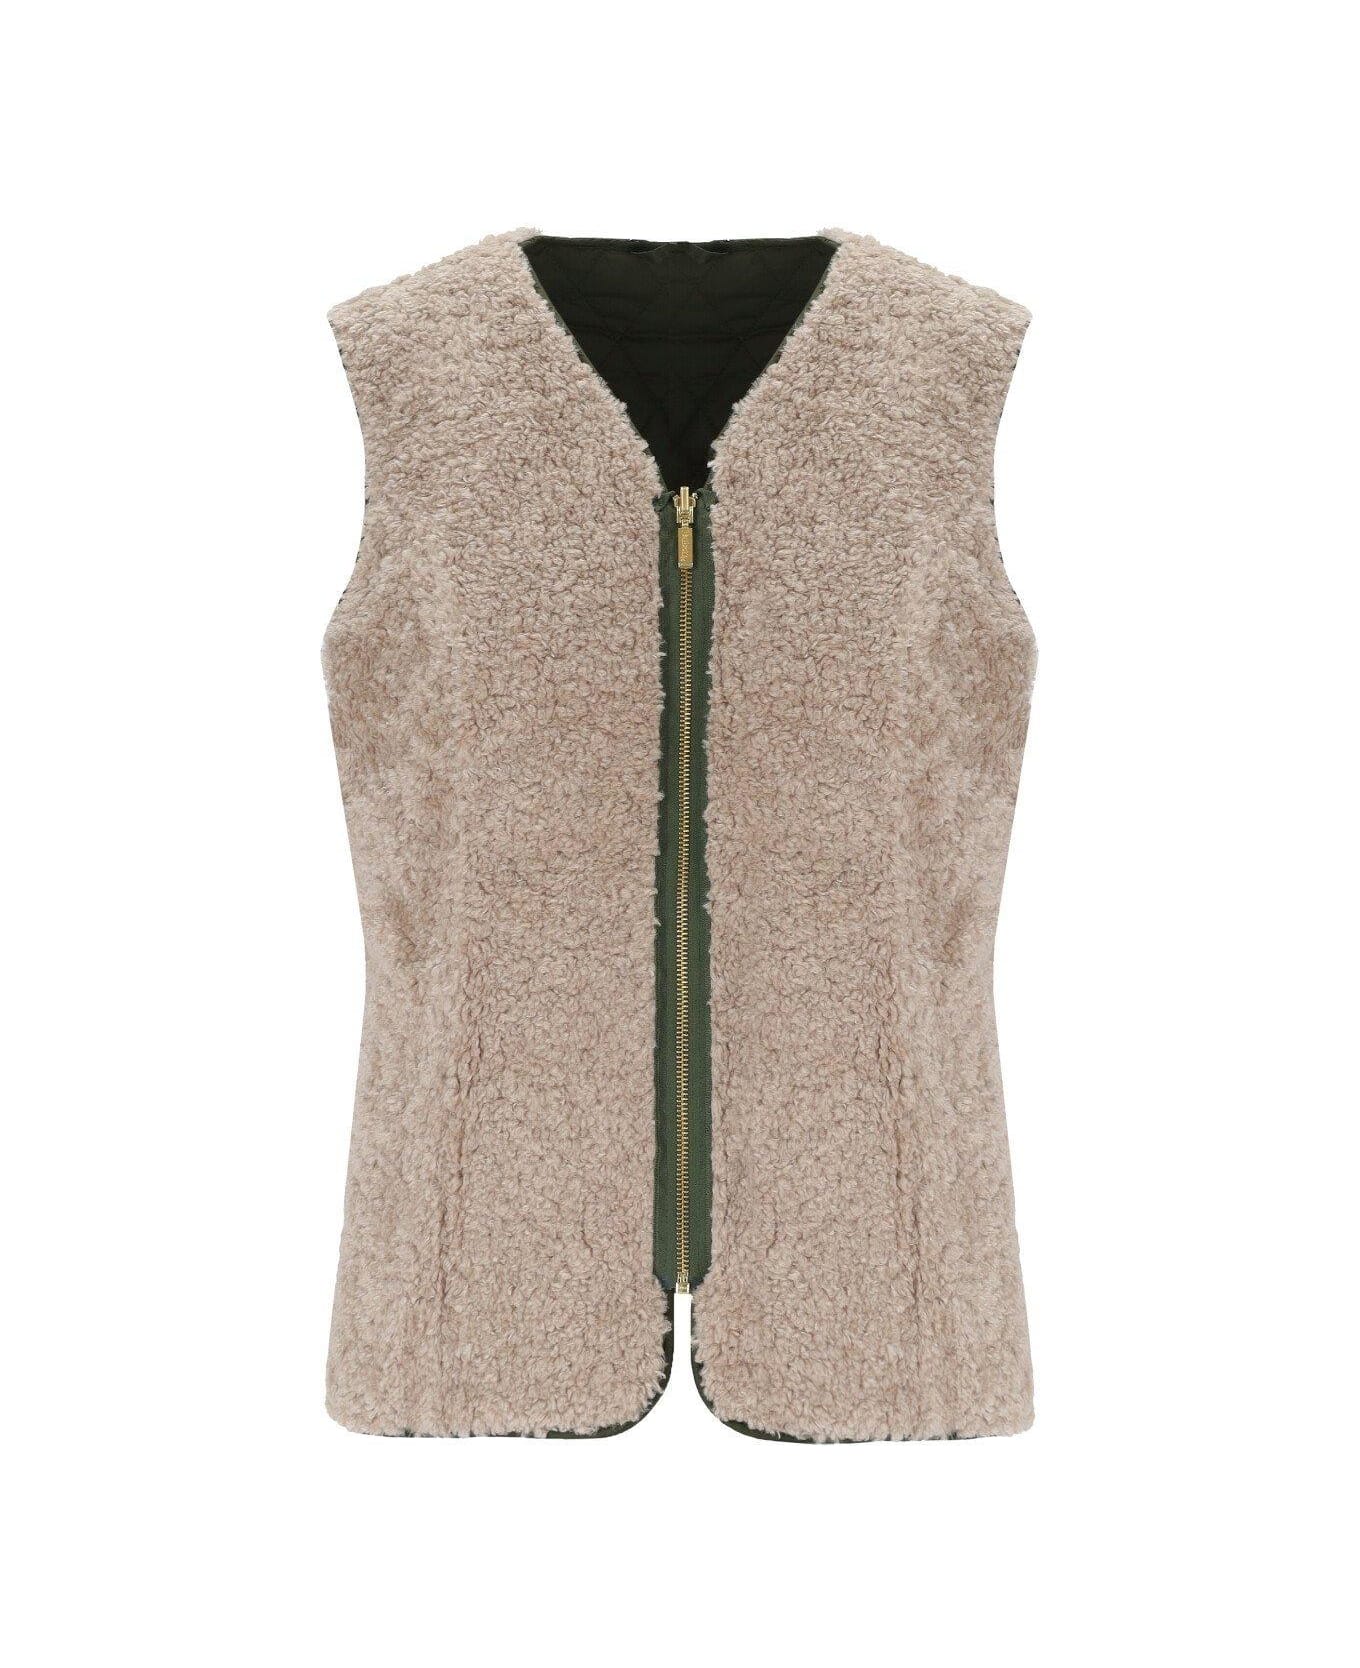 Barbour Reversible Quilted Zipped Gilet - Verde